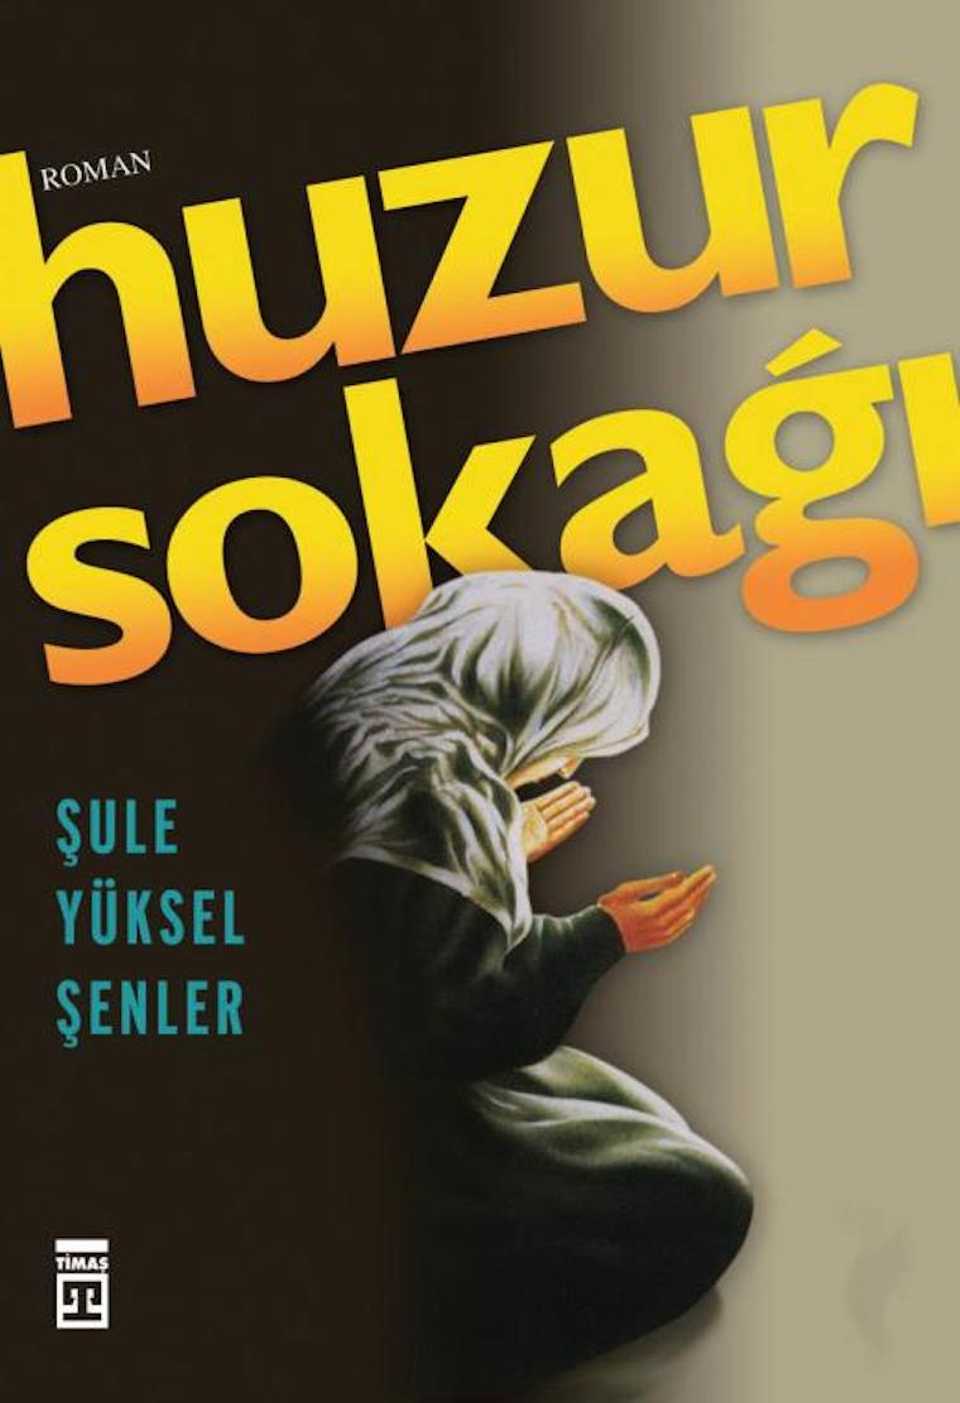 The cover of Senler’s bestseller, Huzur Sokagi or Peaceful Street, which generated a huge following in Turkey since its first publication in 1970.